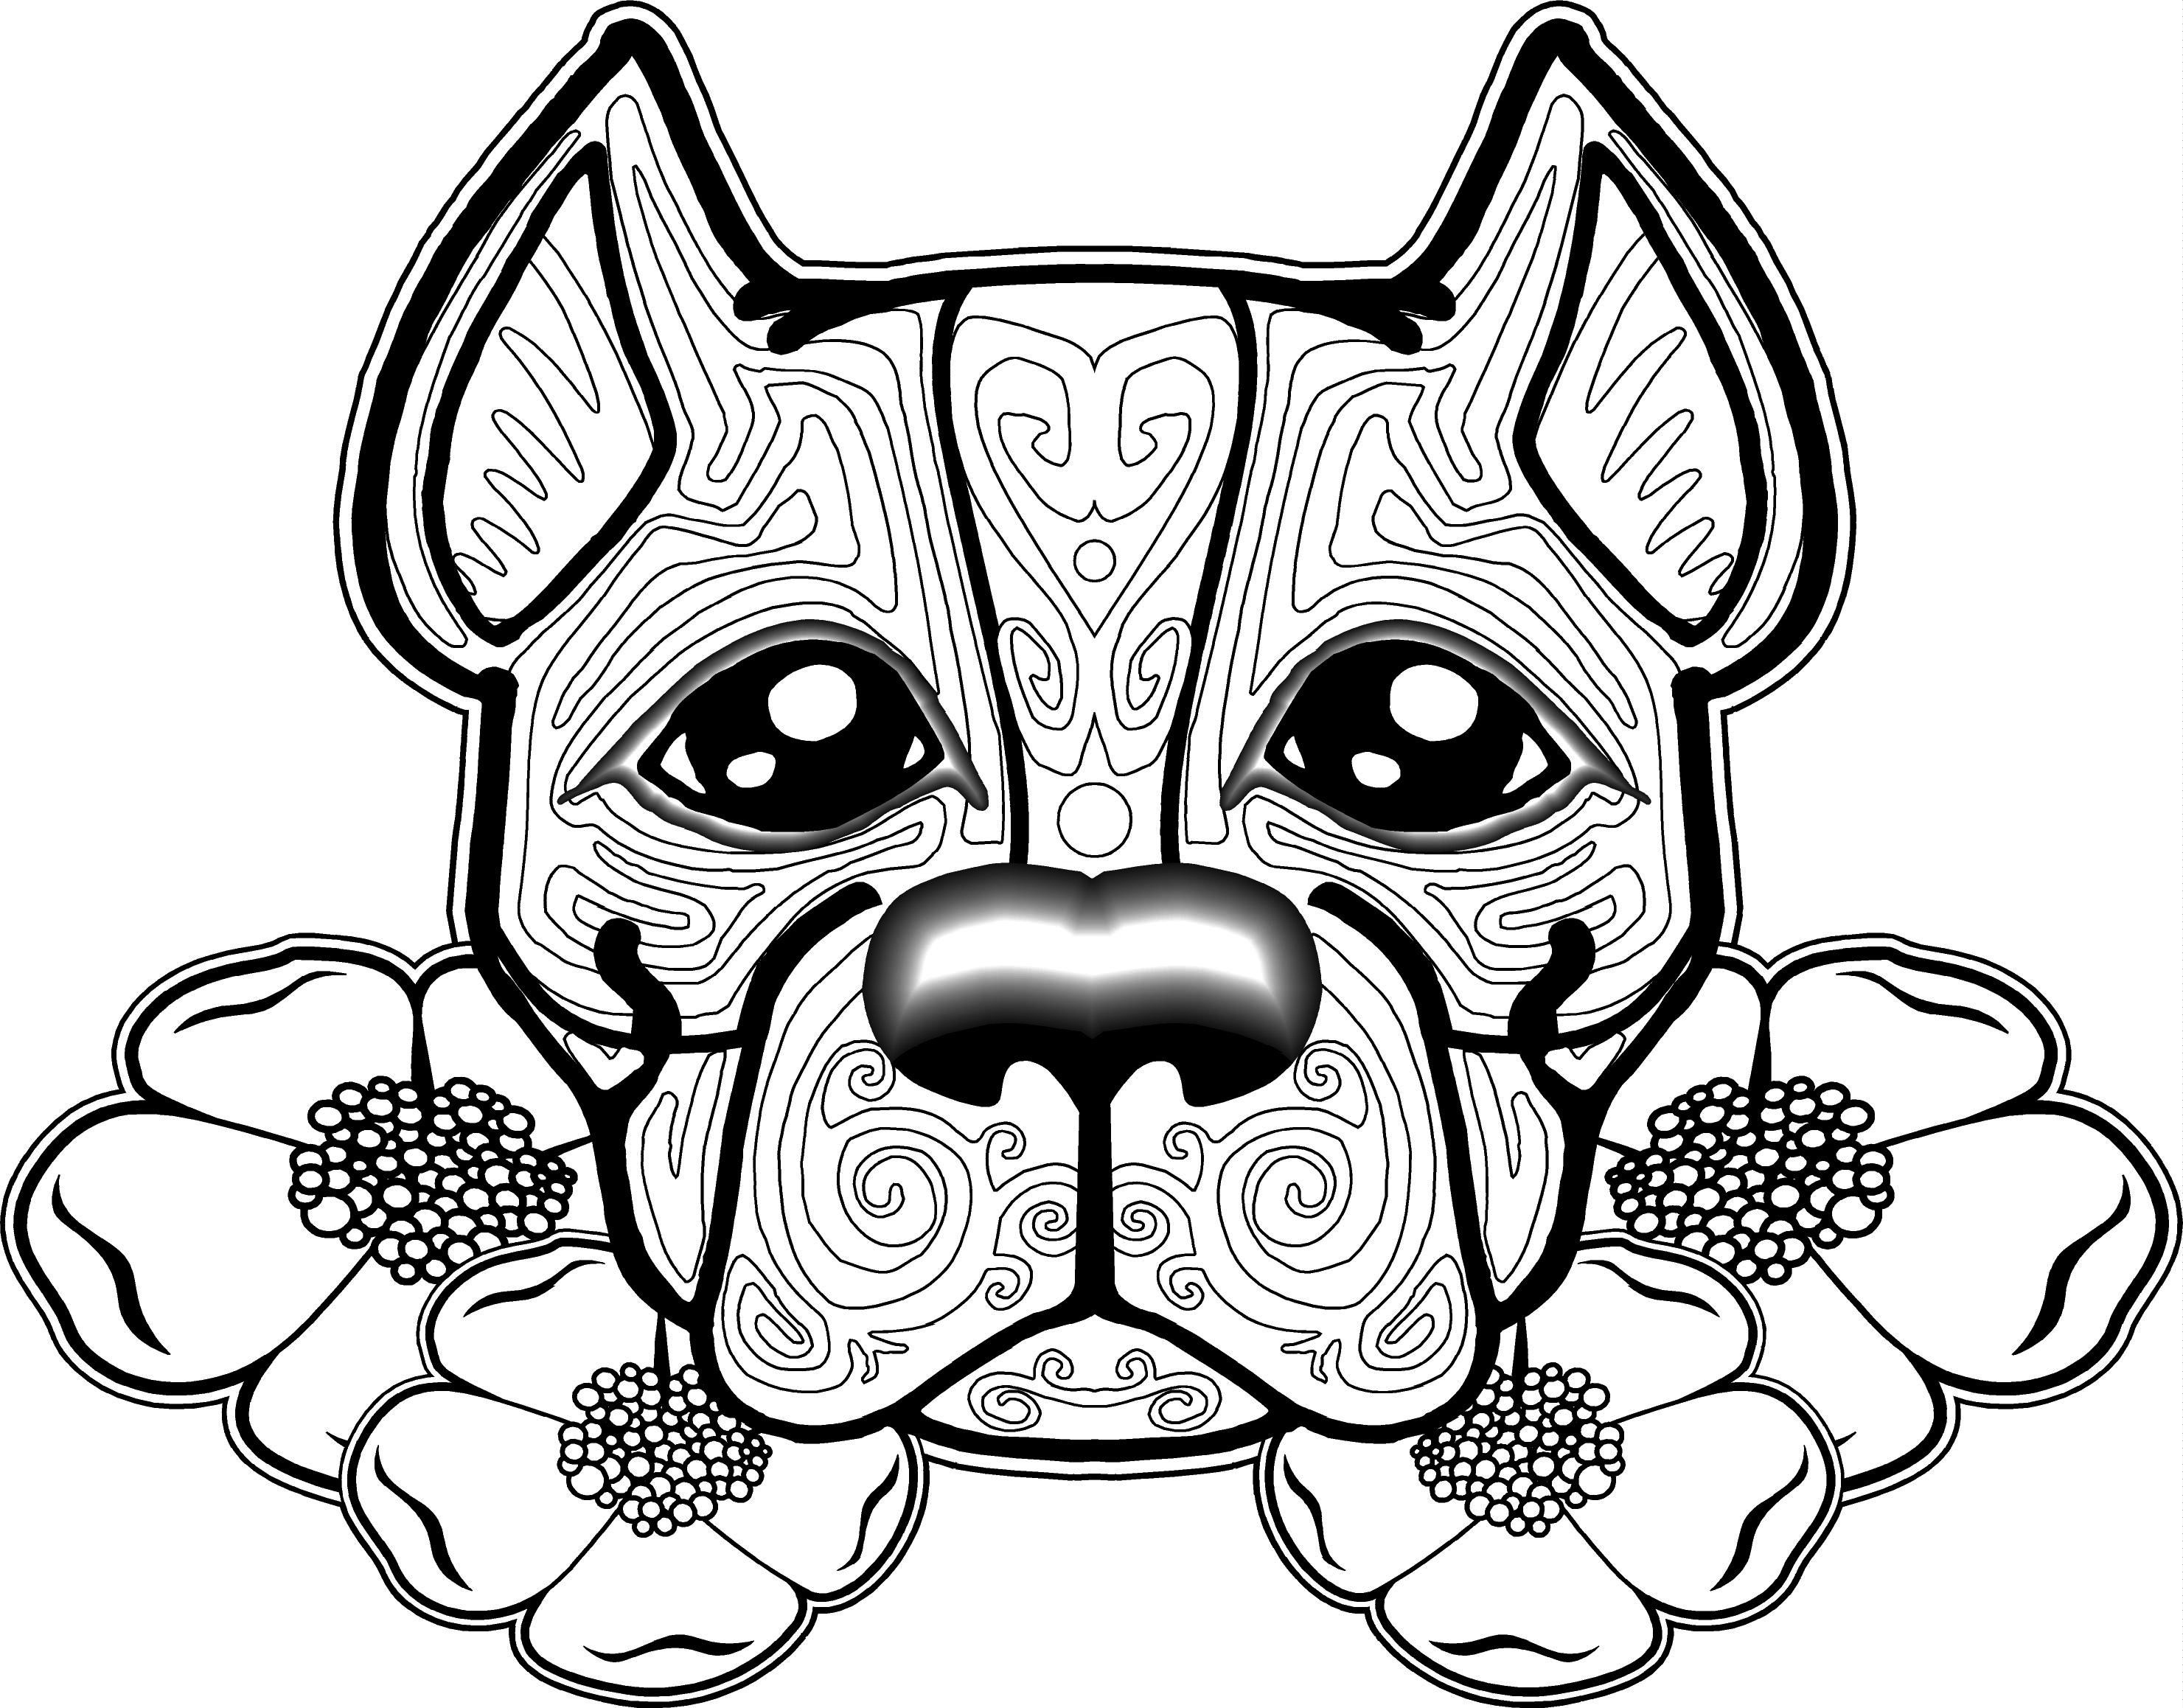 Free Dog Coloring Pages For Adults | Free Printable Coloring Pages - Free Printable Dog Coloring Pages